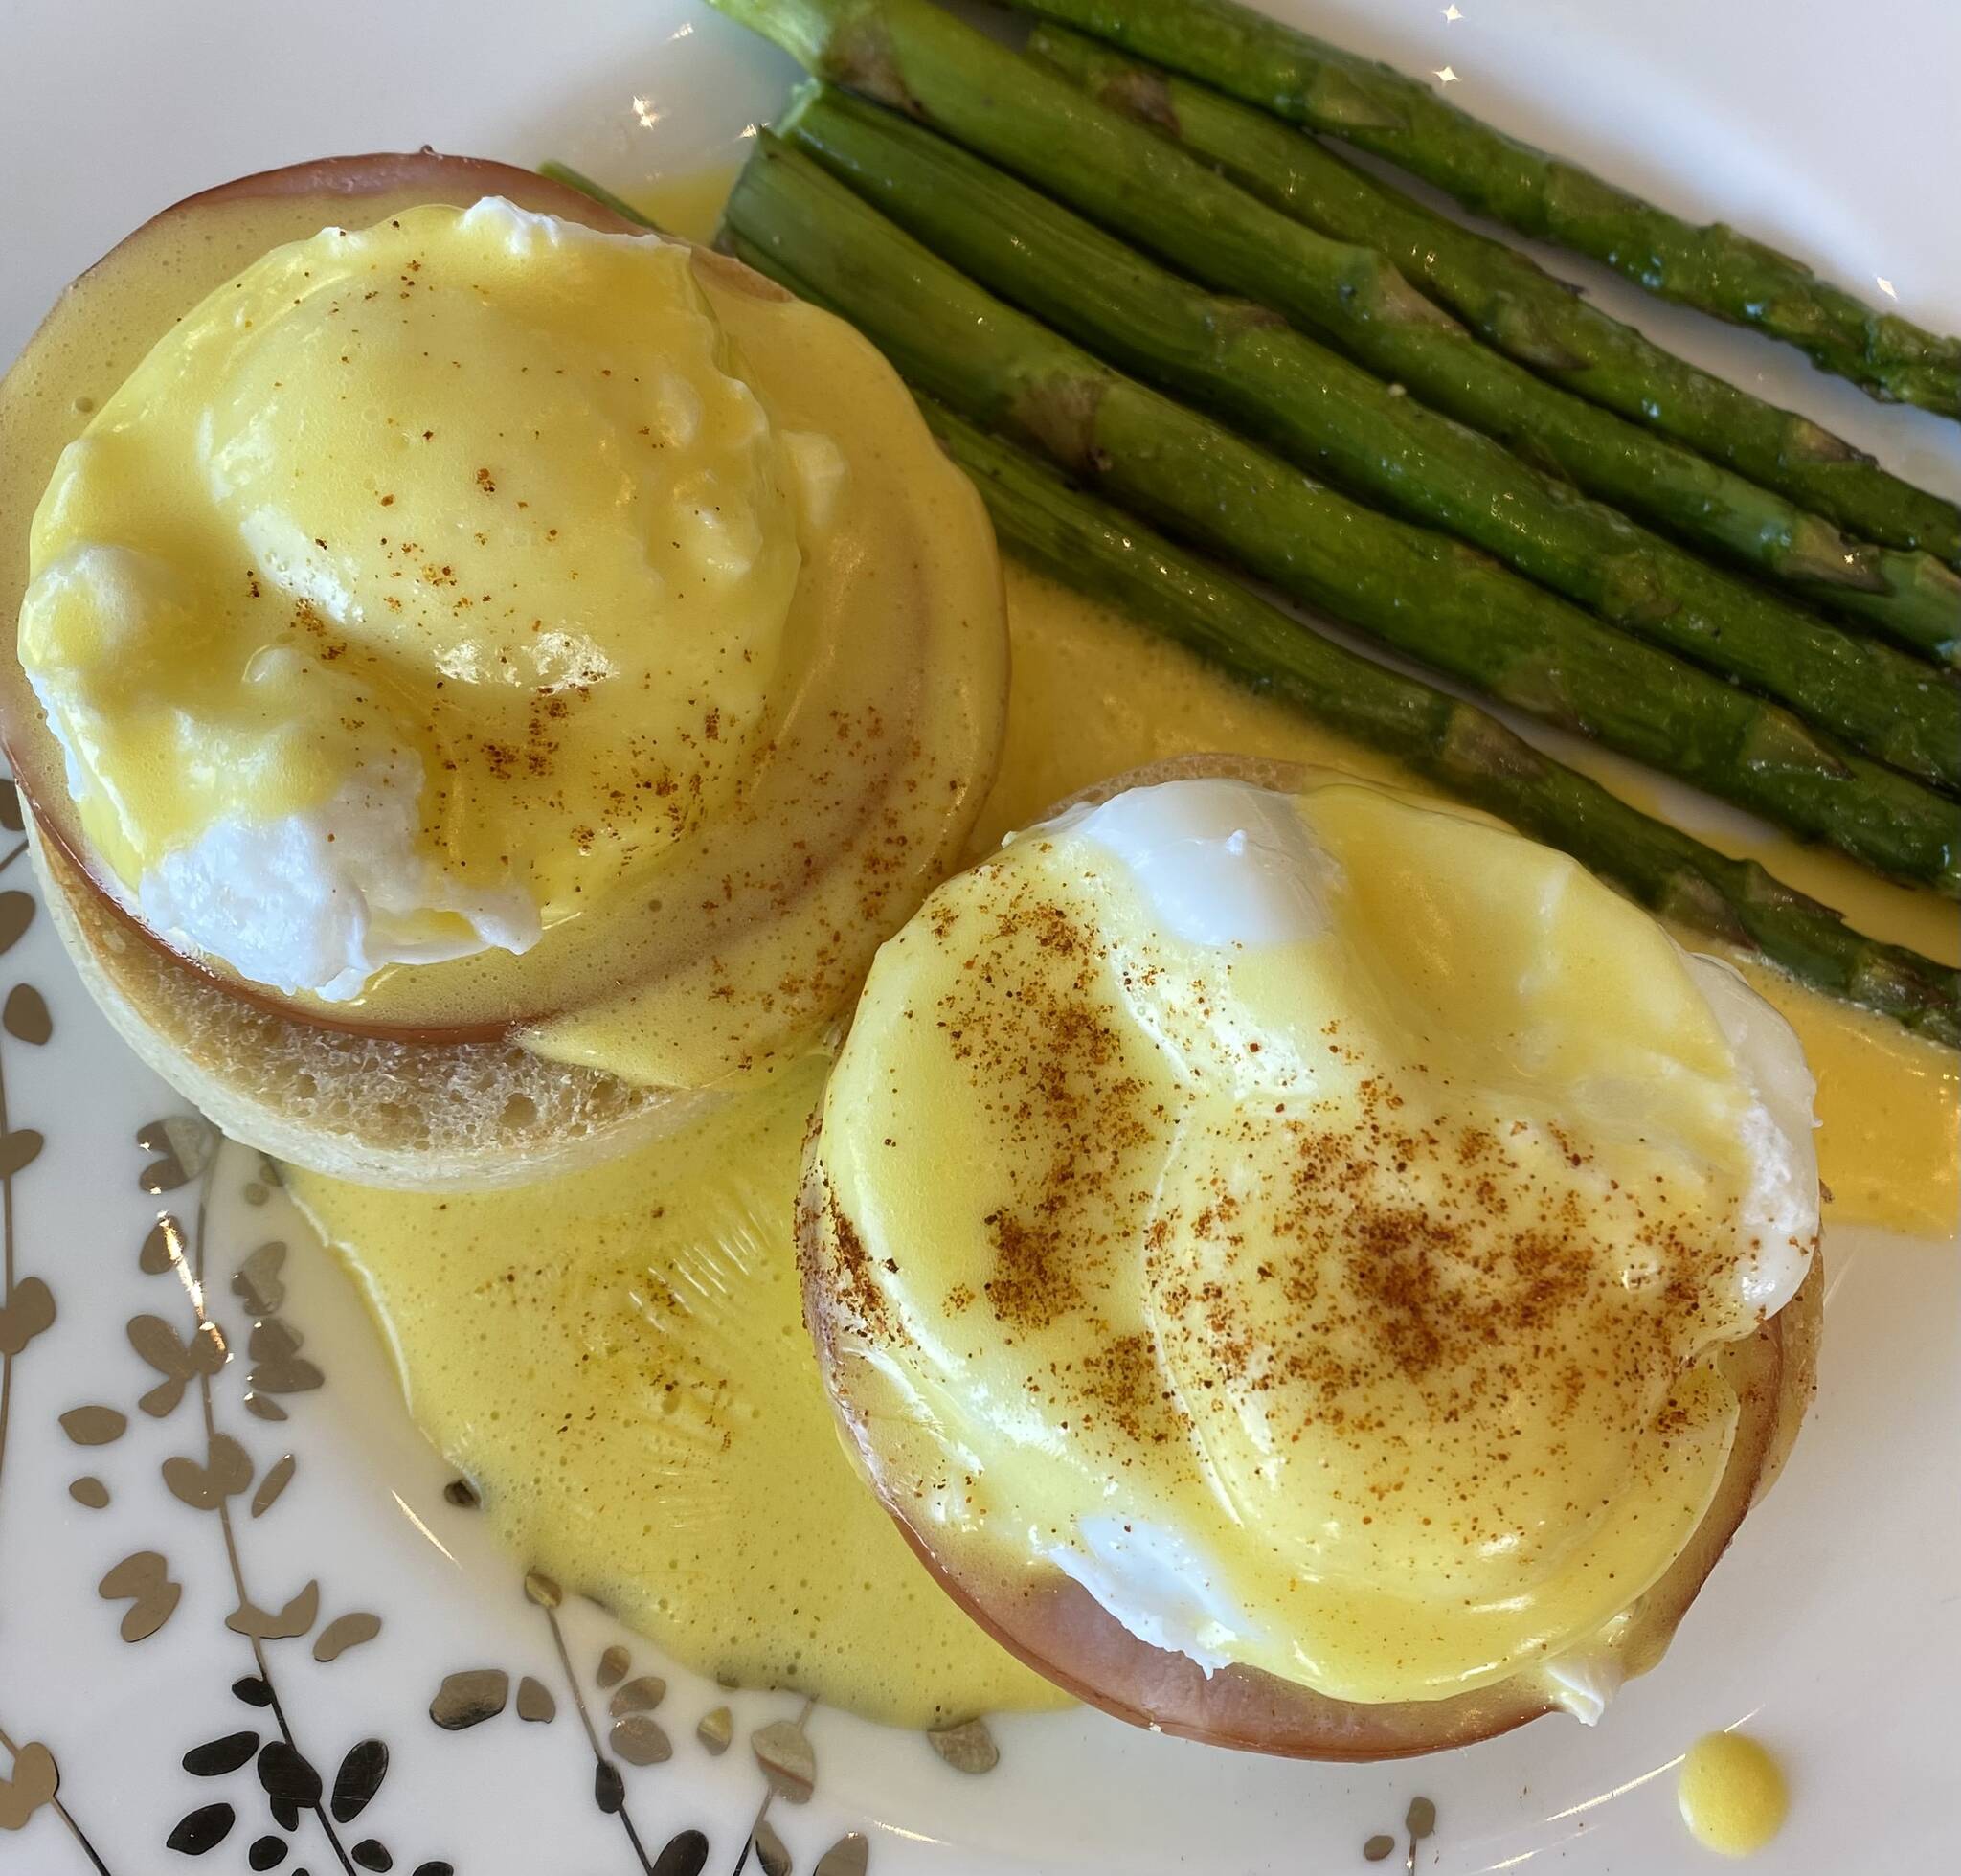 Tressa Dale / Peninsula Clarion
Hollandaise sauce is served on poached eggs.